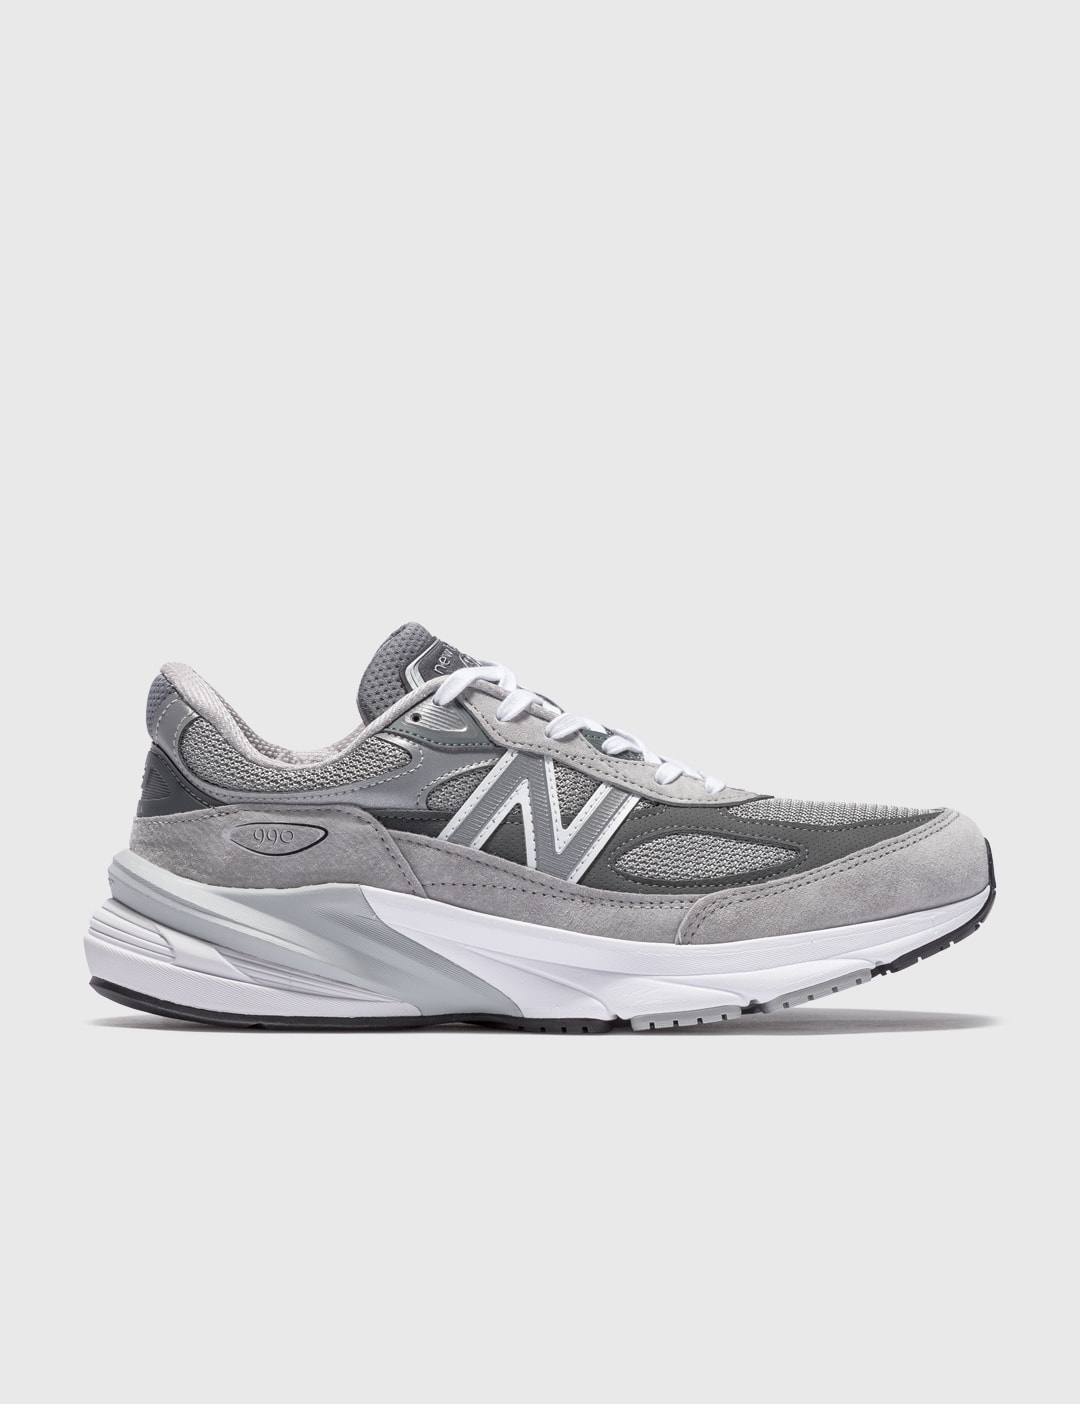 New Balance - Made in USA 990v6 | HBX - Globally Curated Fashion and ...